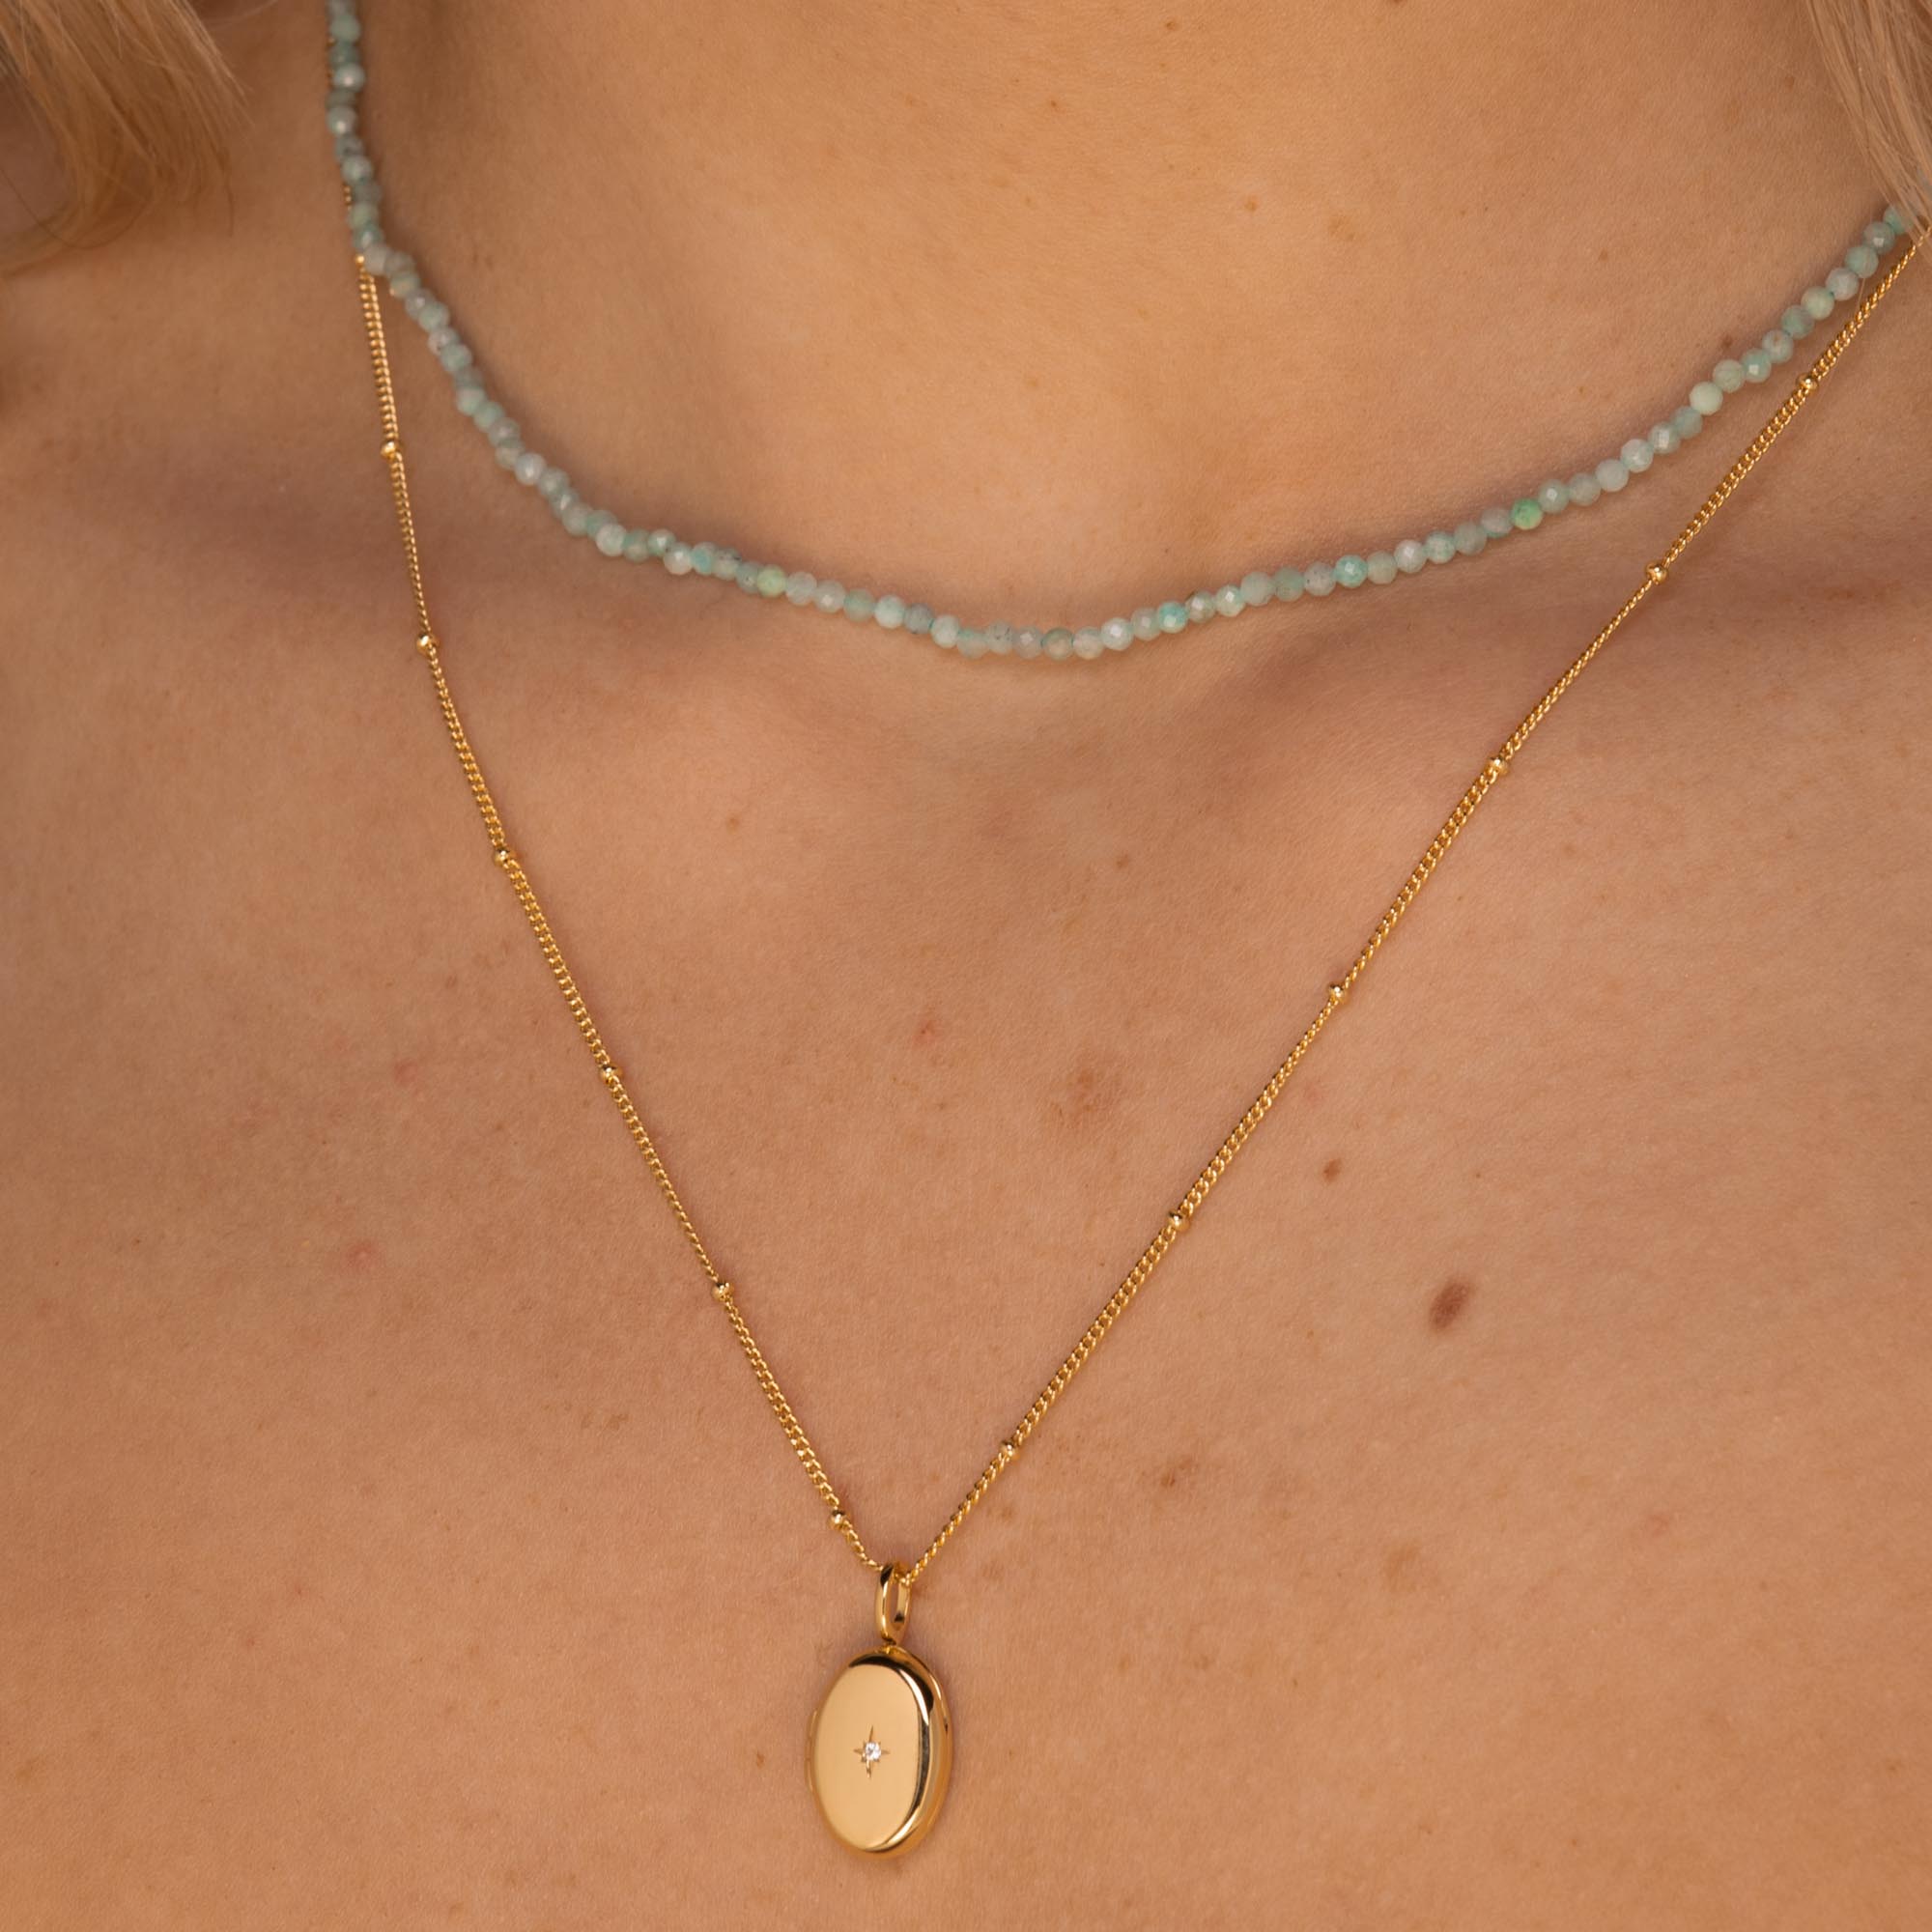 North Star Oval Locket Necklace Rose Gold